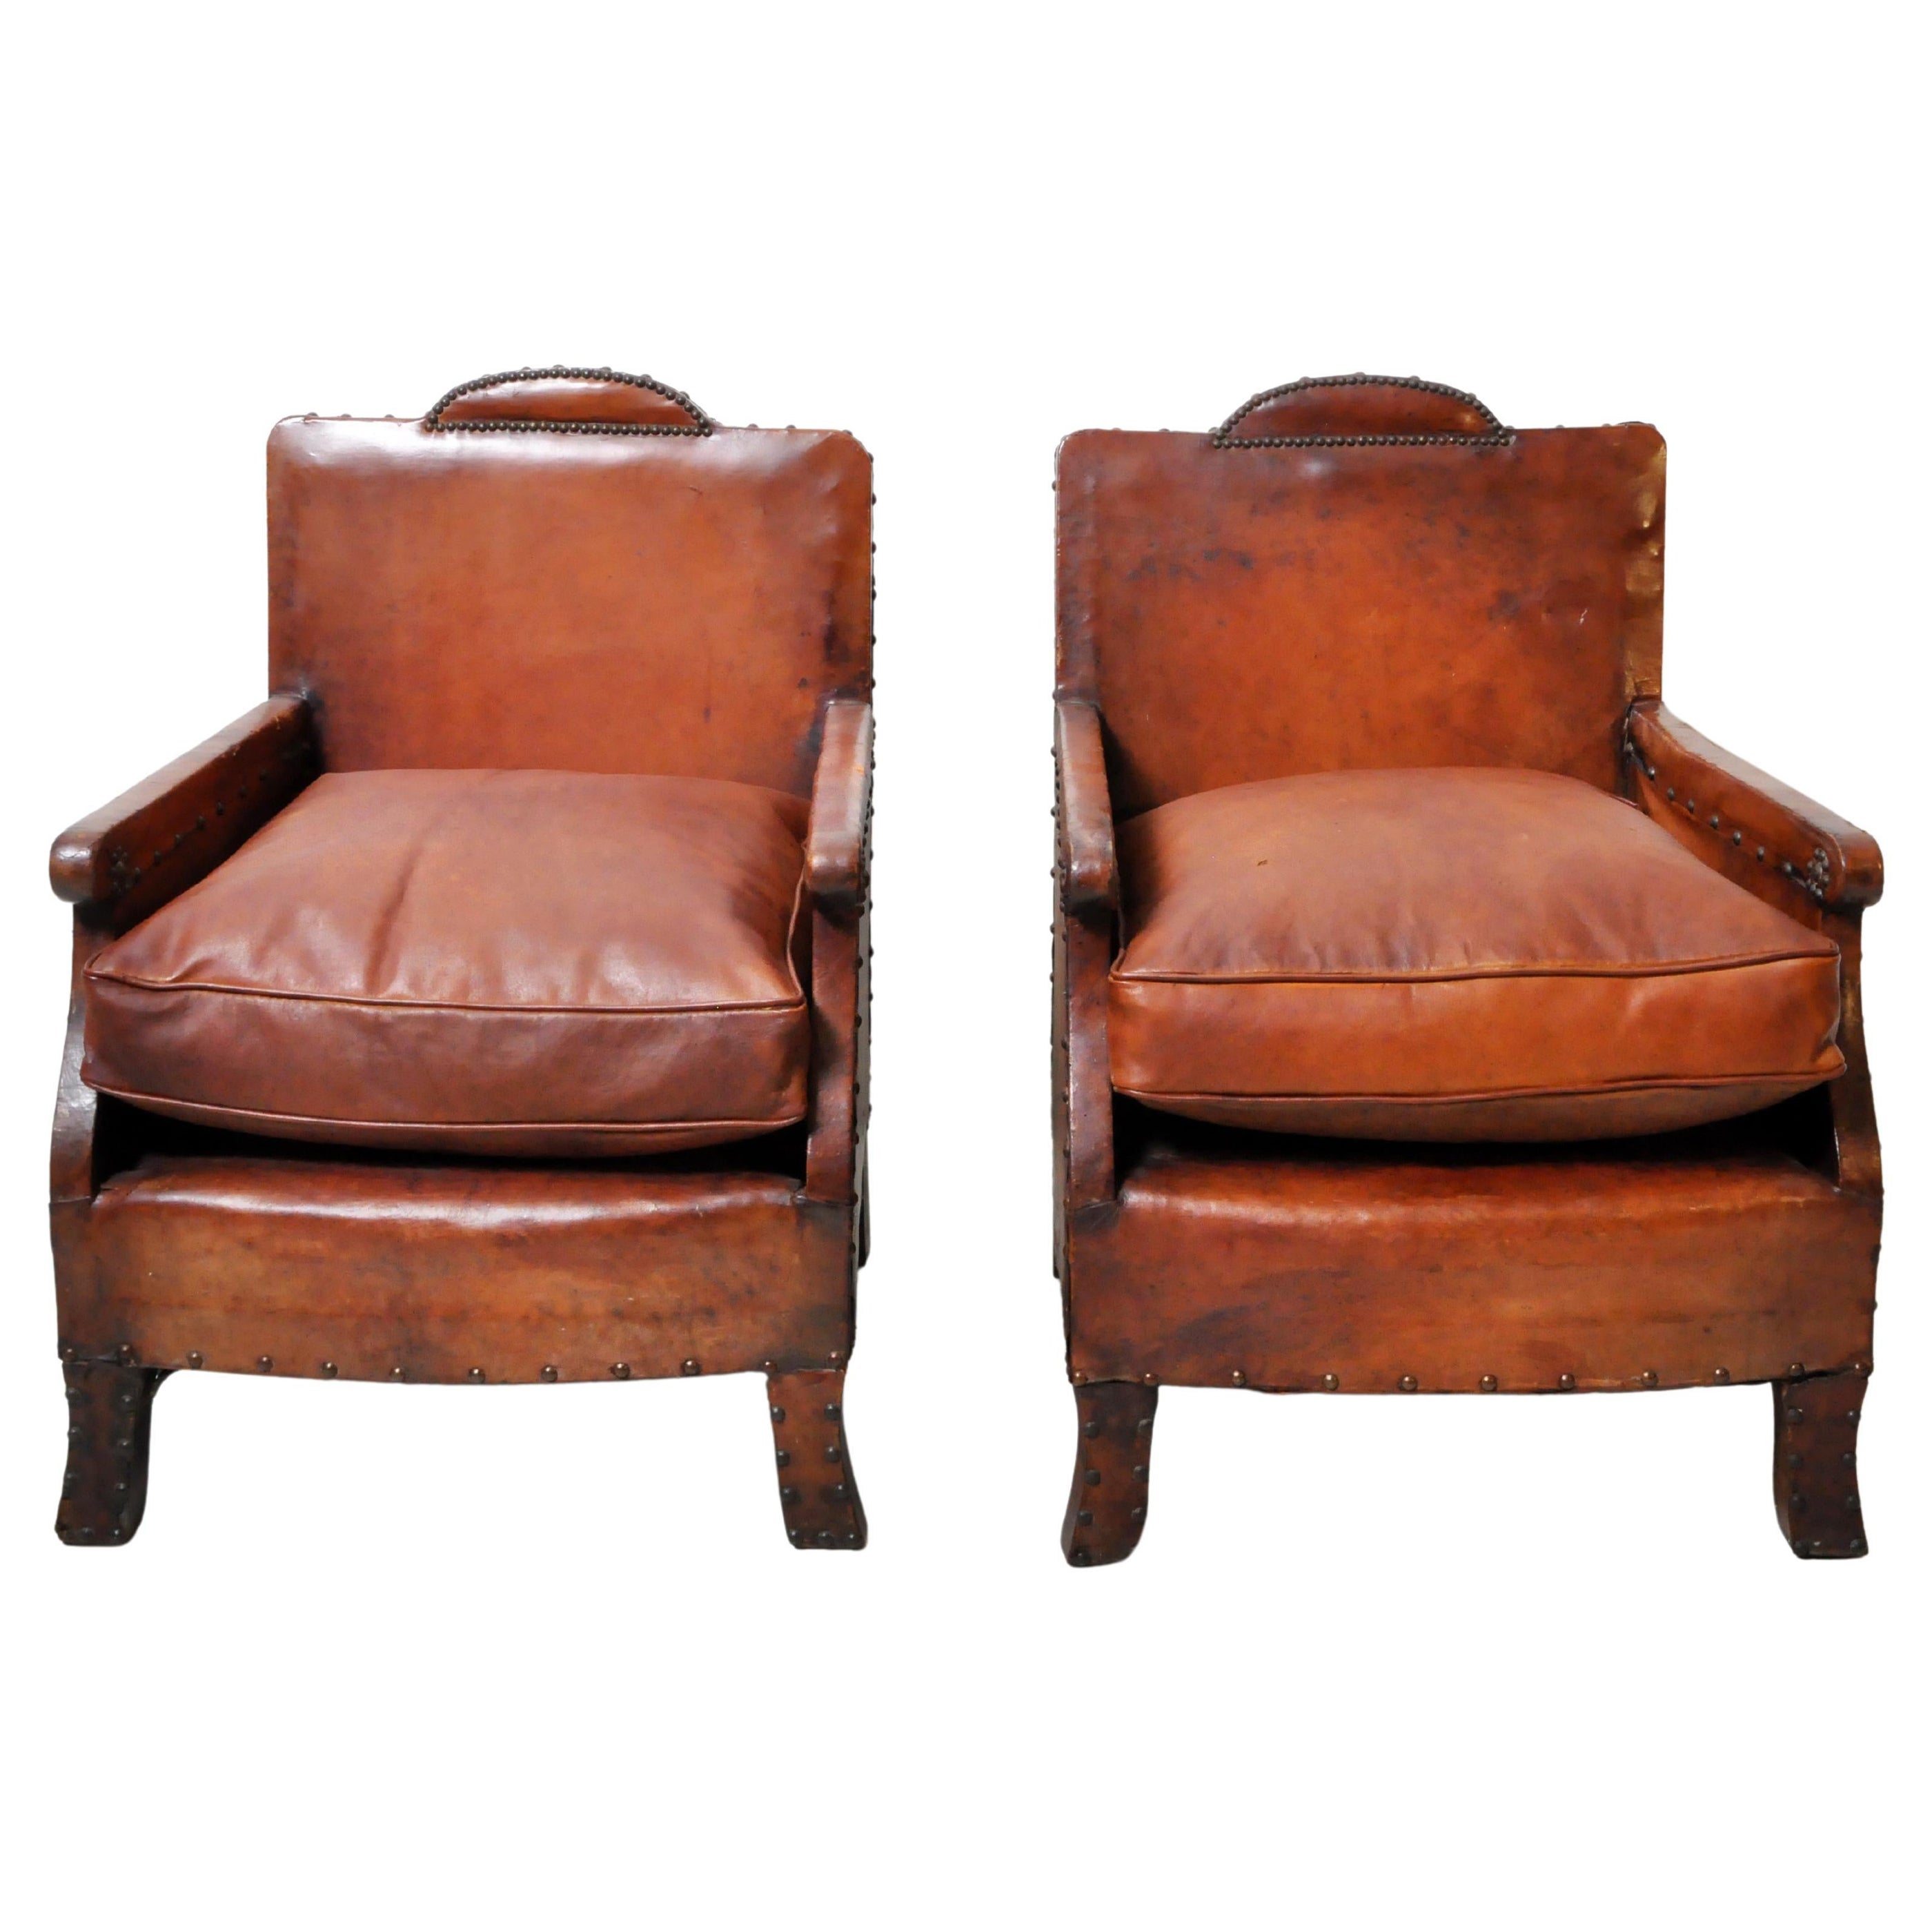 Pair of Art Deco Club Chairs with New Leather Seats